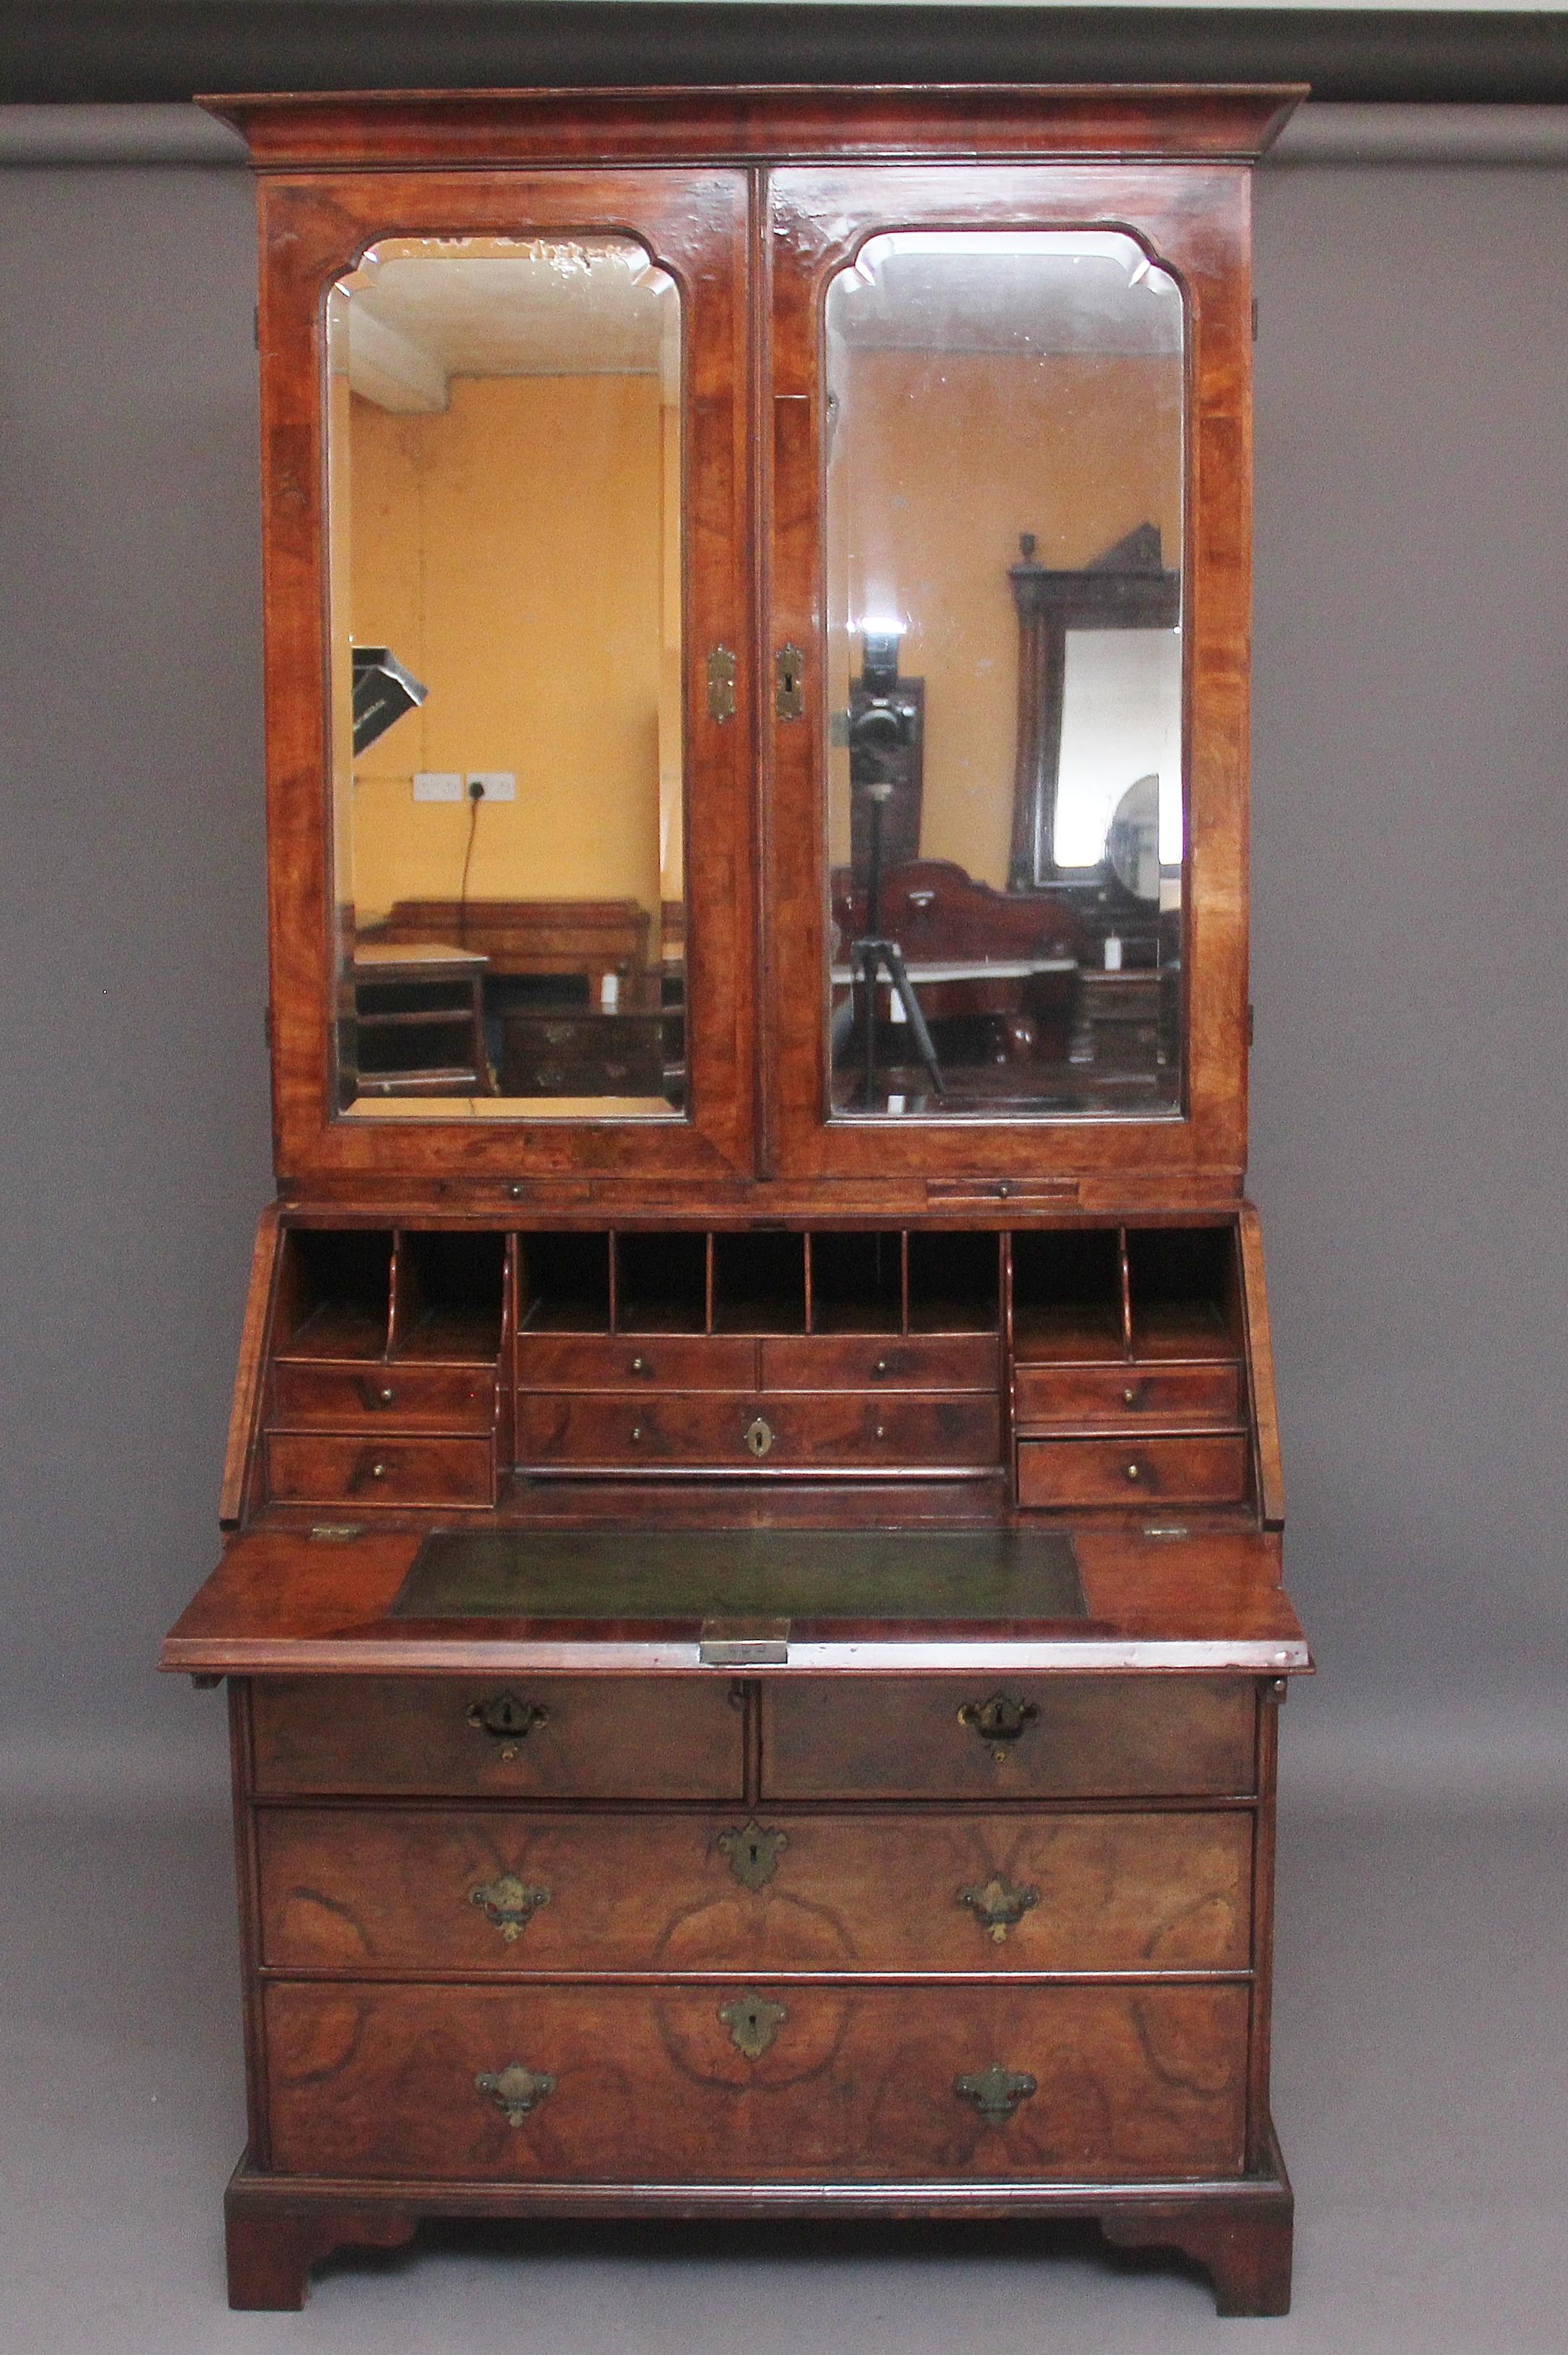 Early 18th century walnut bureau bookcase, the shaped cornice above a mirrored front bookcase with the two doors opening to reveal shelf space, various compartments and six oak lined drawers, the bottom of the bookcase having two pull out candle